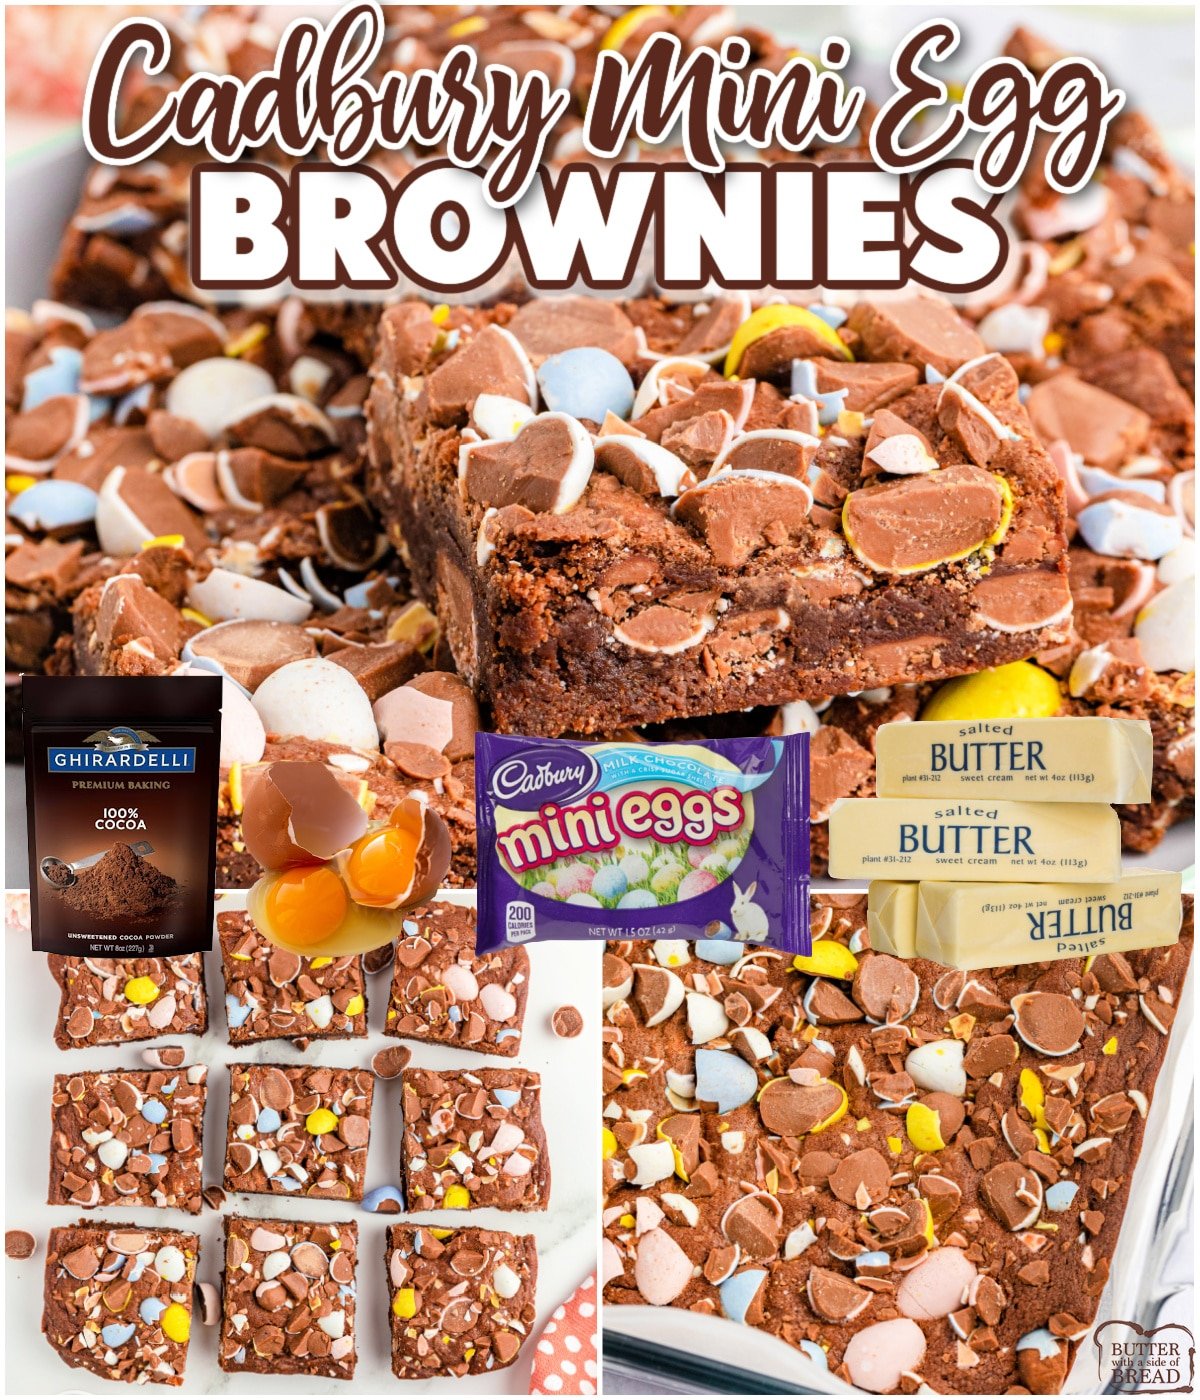 Cadbury Mini Egg Brownies are rich, fudgy, and decadent. Only a few minutes of prep time to make this delicious brownie recipe that is made from scratch and packed with Cadbury Mini Eggs!